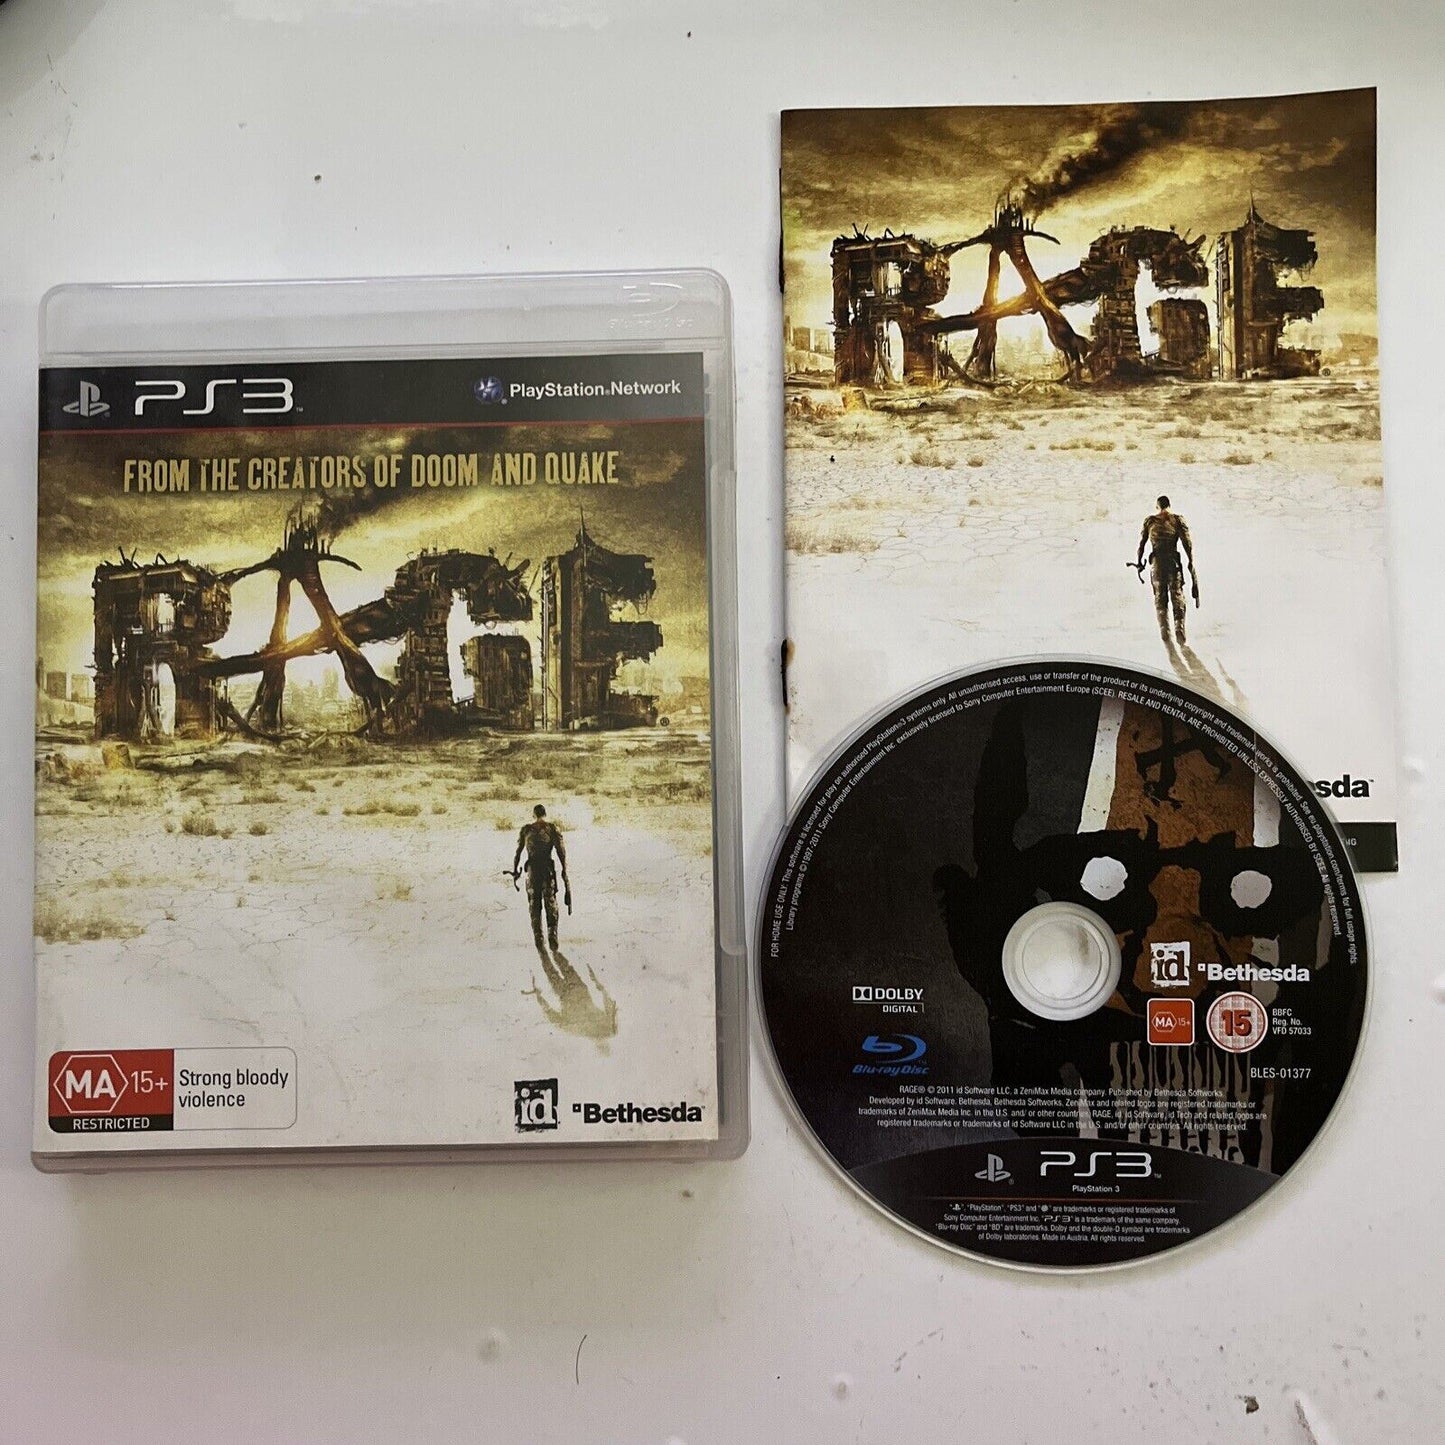 RAGE - Sony Playstation 3 PS3 Game